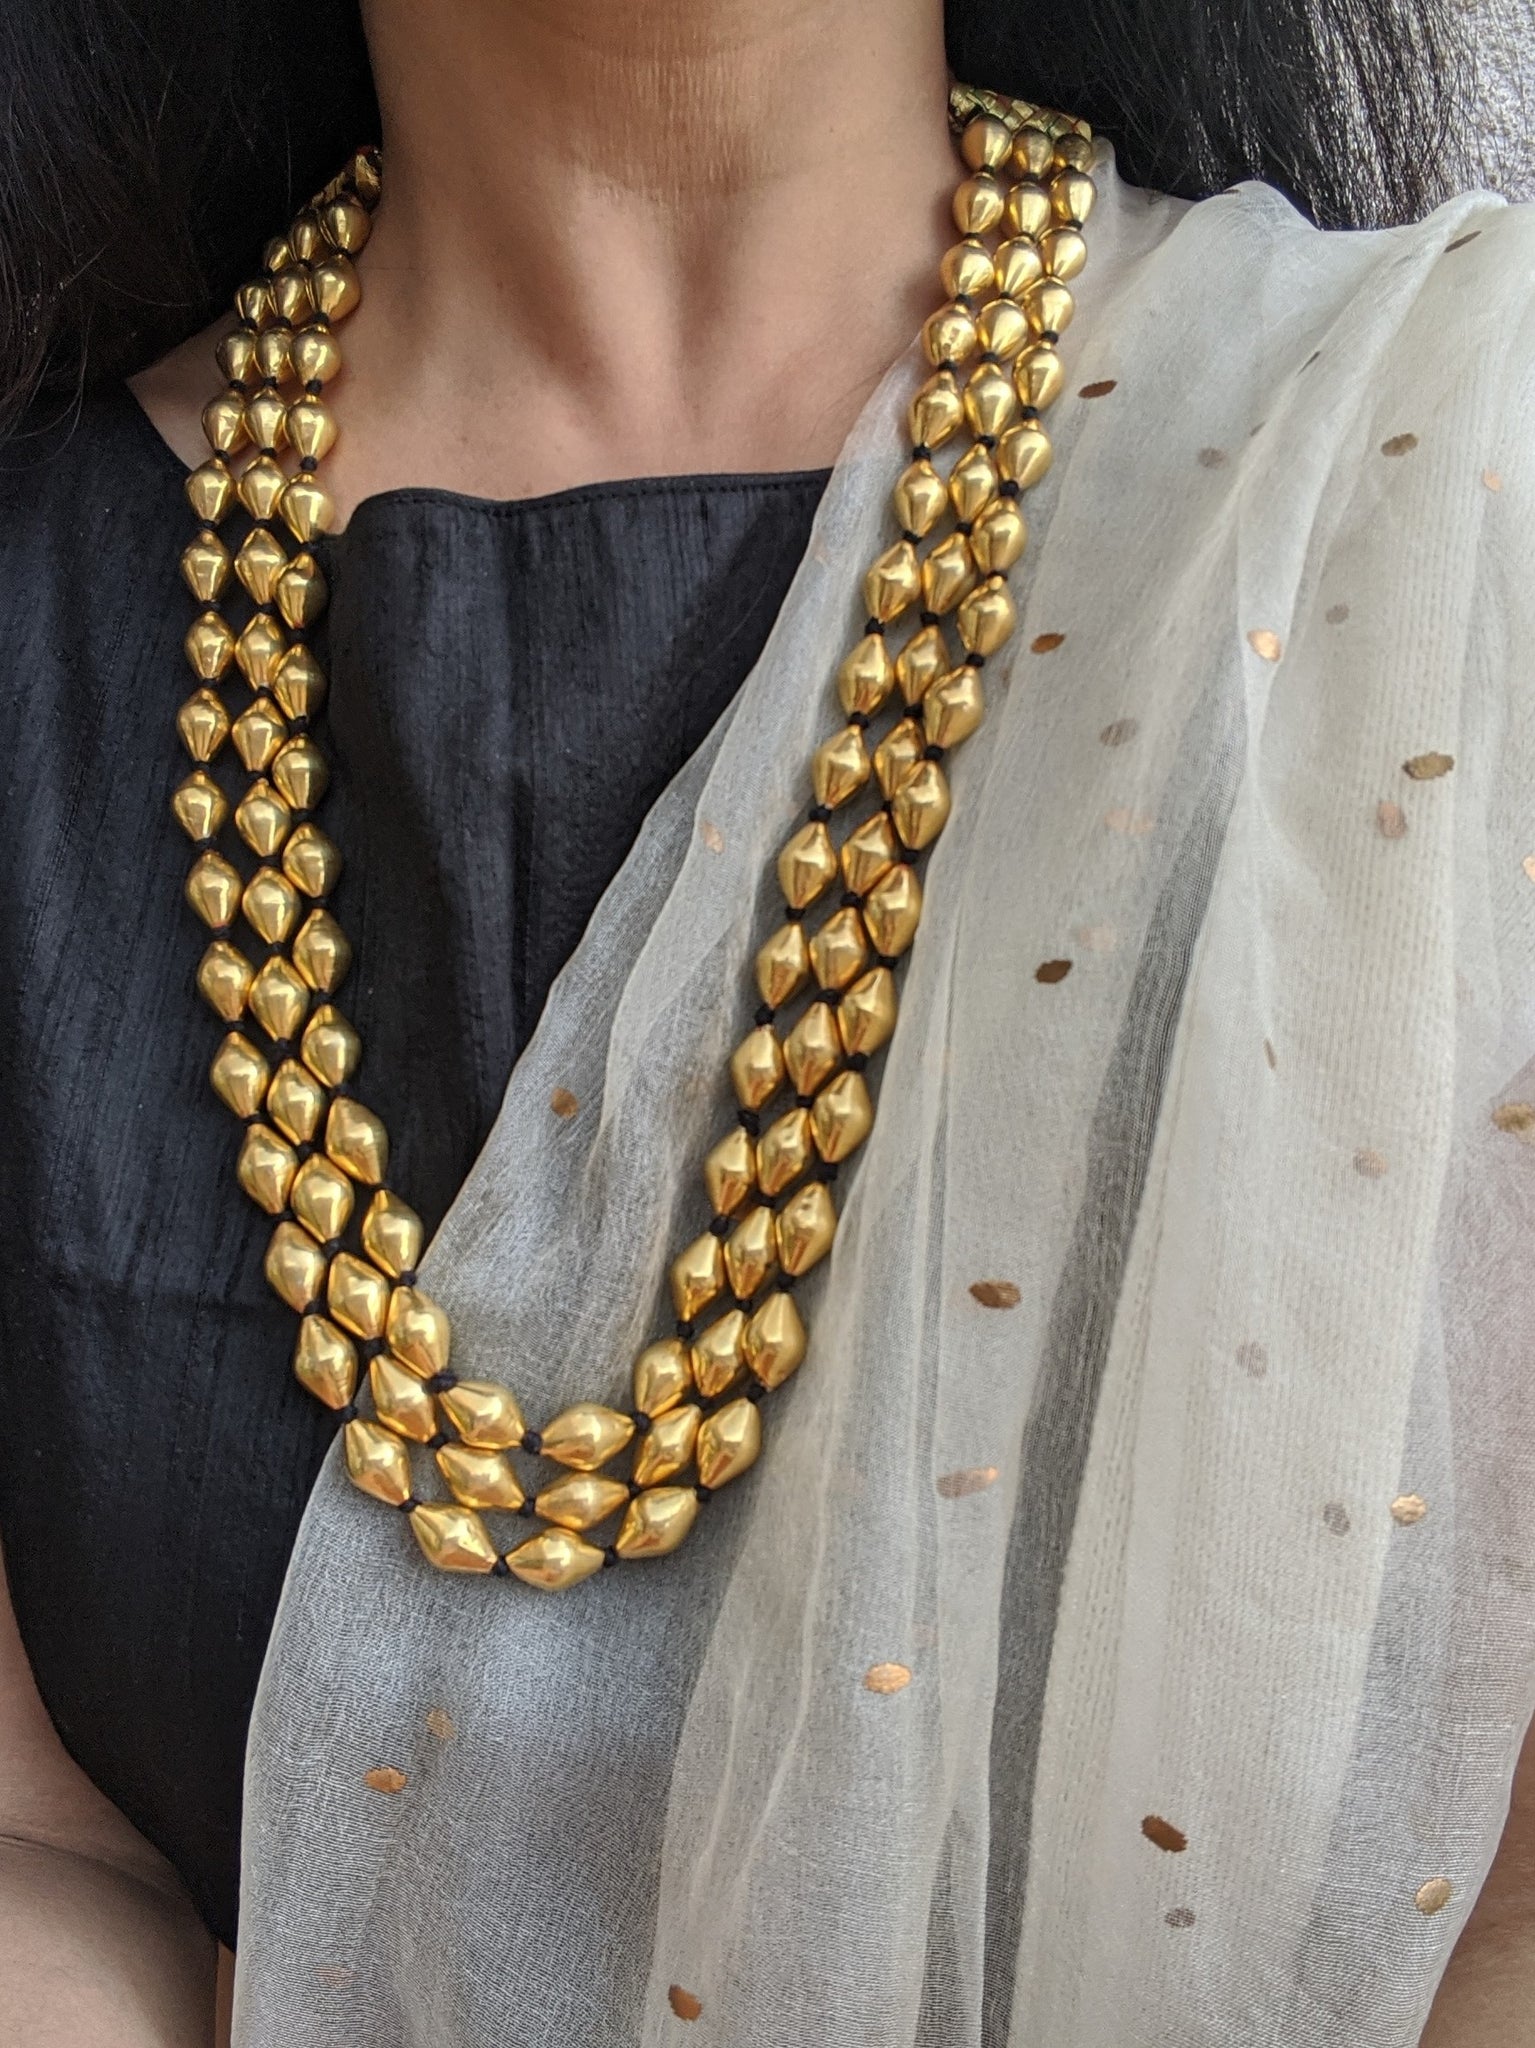 Gold Plated Long Gold Beads Necklace by Niscka - Long Necklace Design